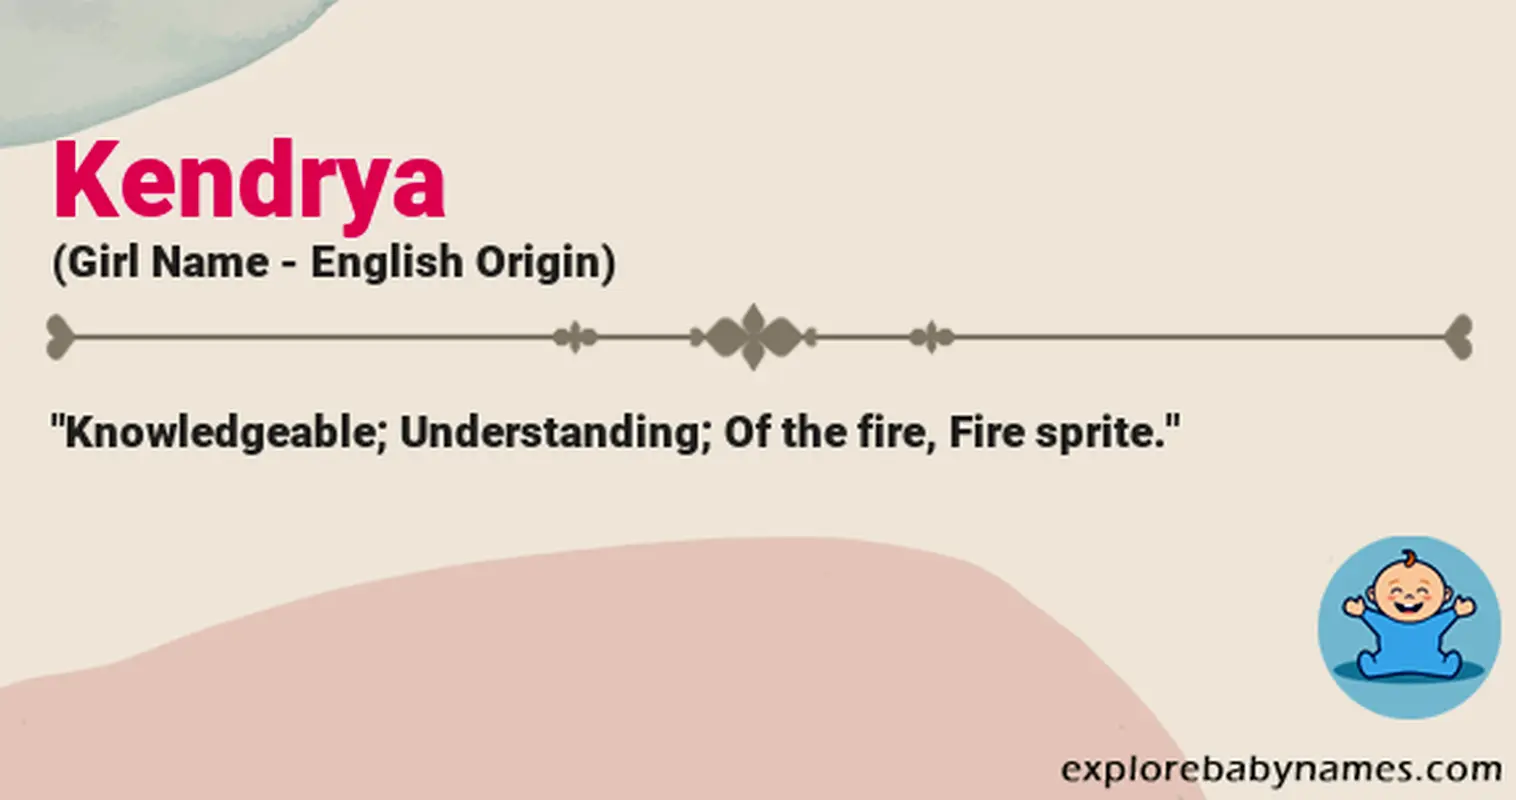 Meaning of Kendrya